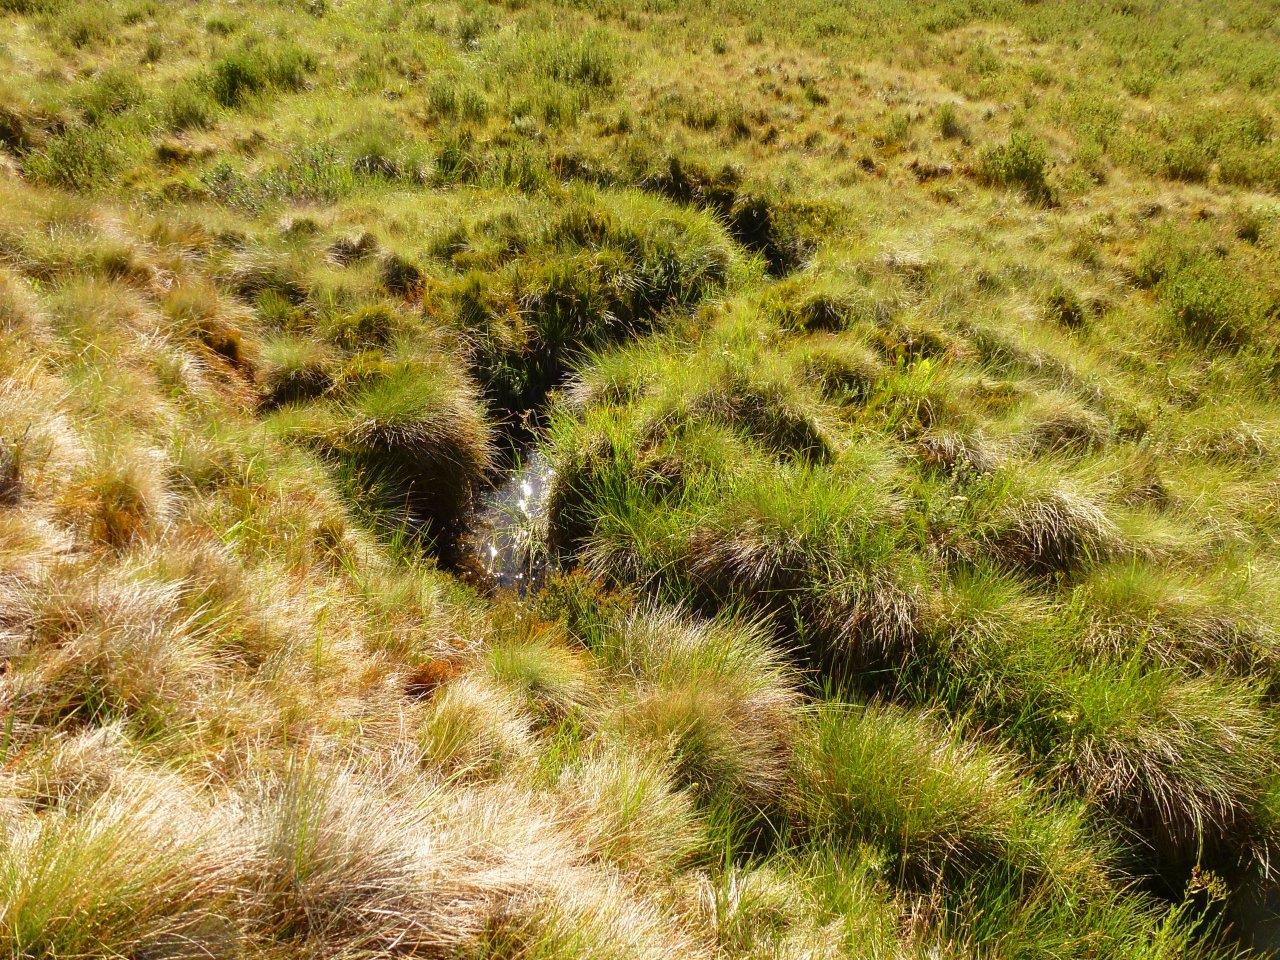 Creek on Happy Jacks Plains, Kosciuszko National Park. There are no feral horses in this area.  The photo shows what a normal creek should look like.